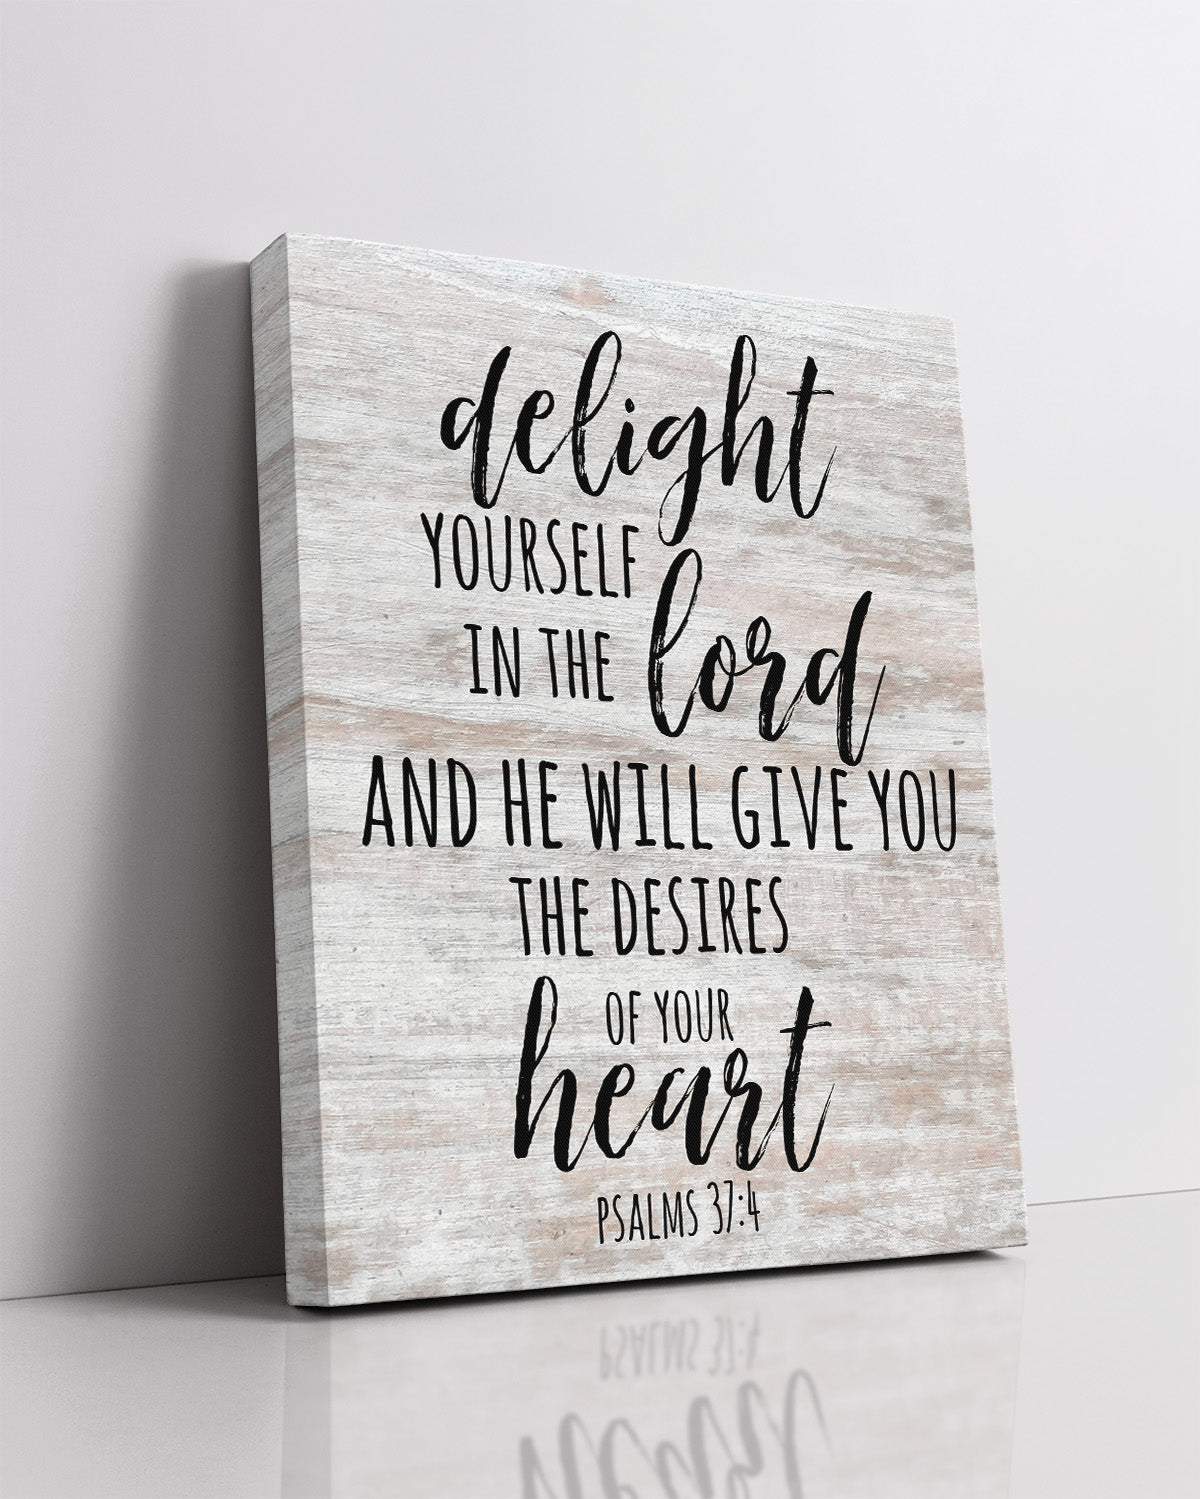 Delight yourself in the Lord, Psalm 37:4 bible verse - Christian home decor - Motivational wall art for farmhouse decor - Christmas gifts for women